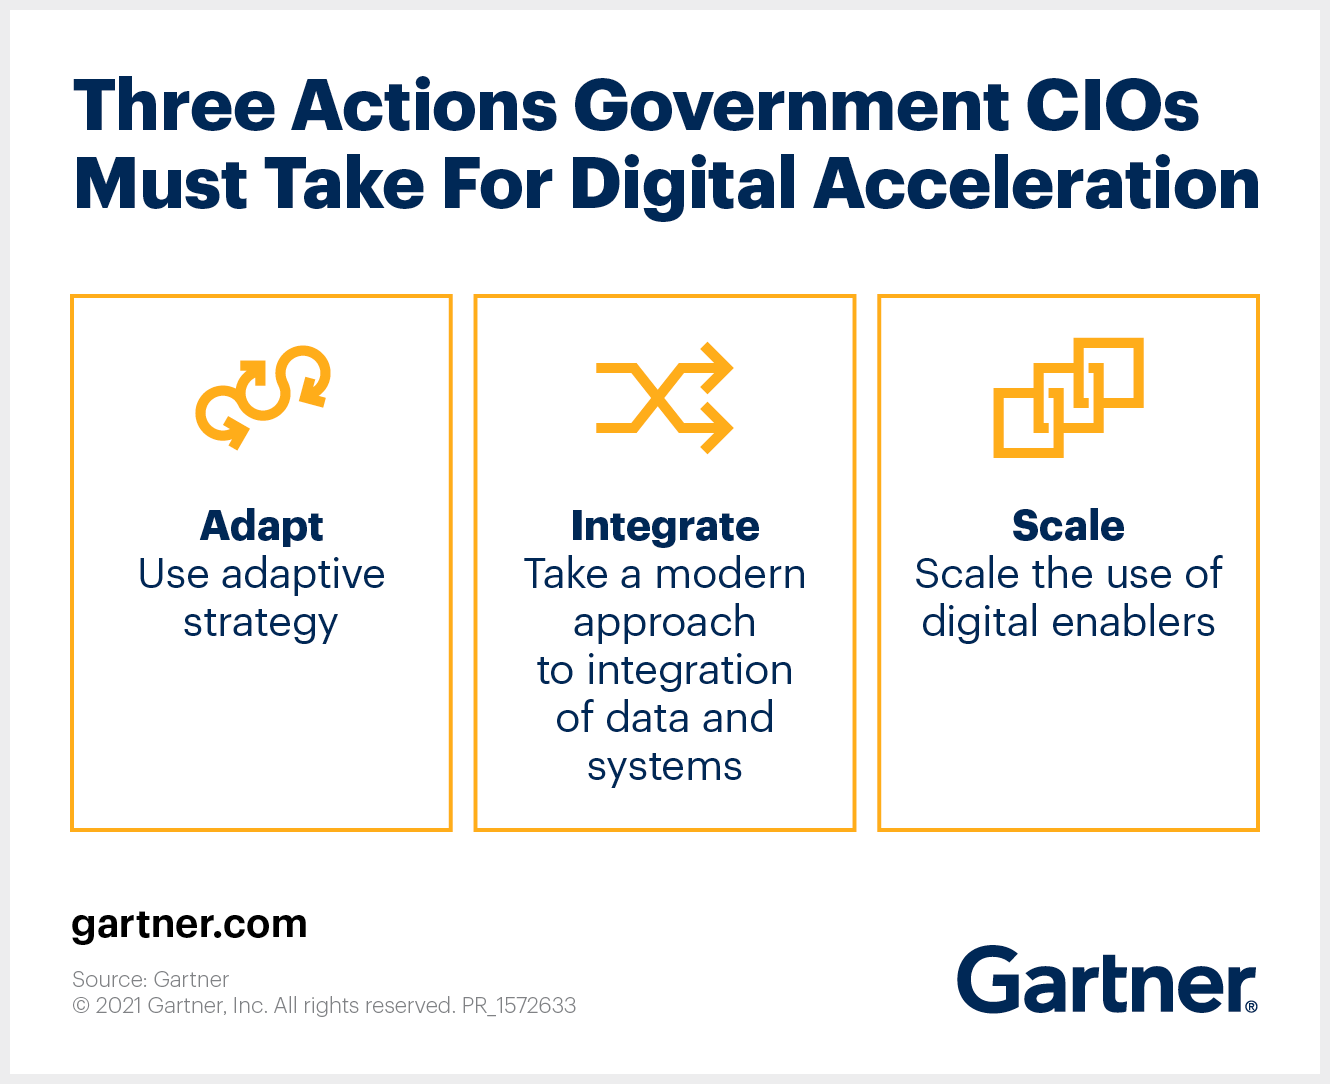 The graphic describes three actions for government CIOs to accelerate their digital initiatives